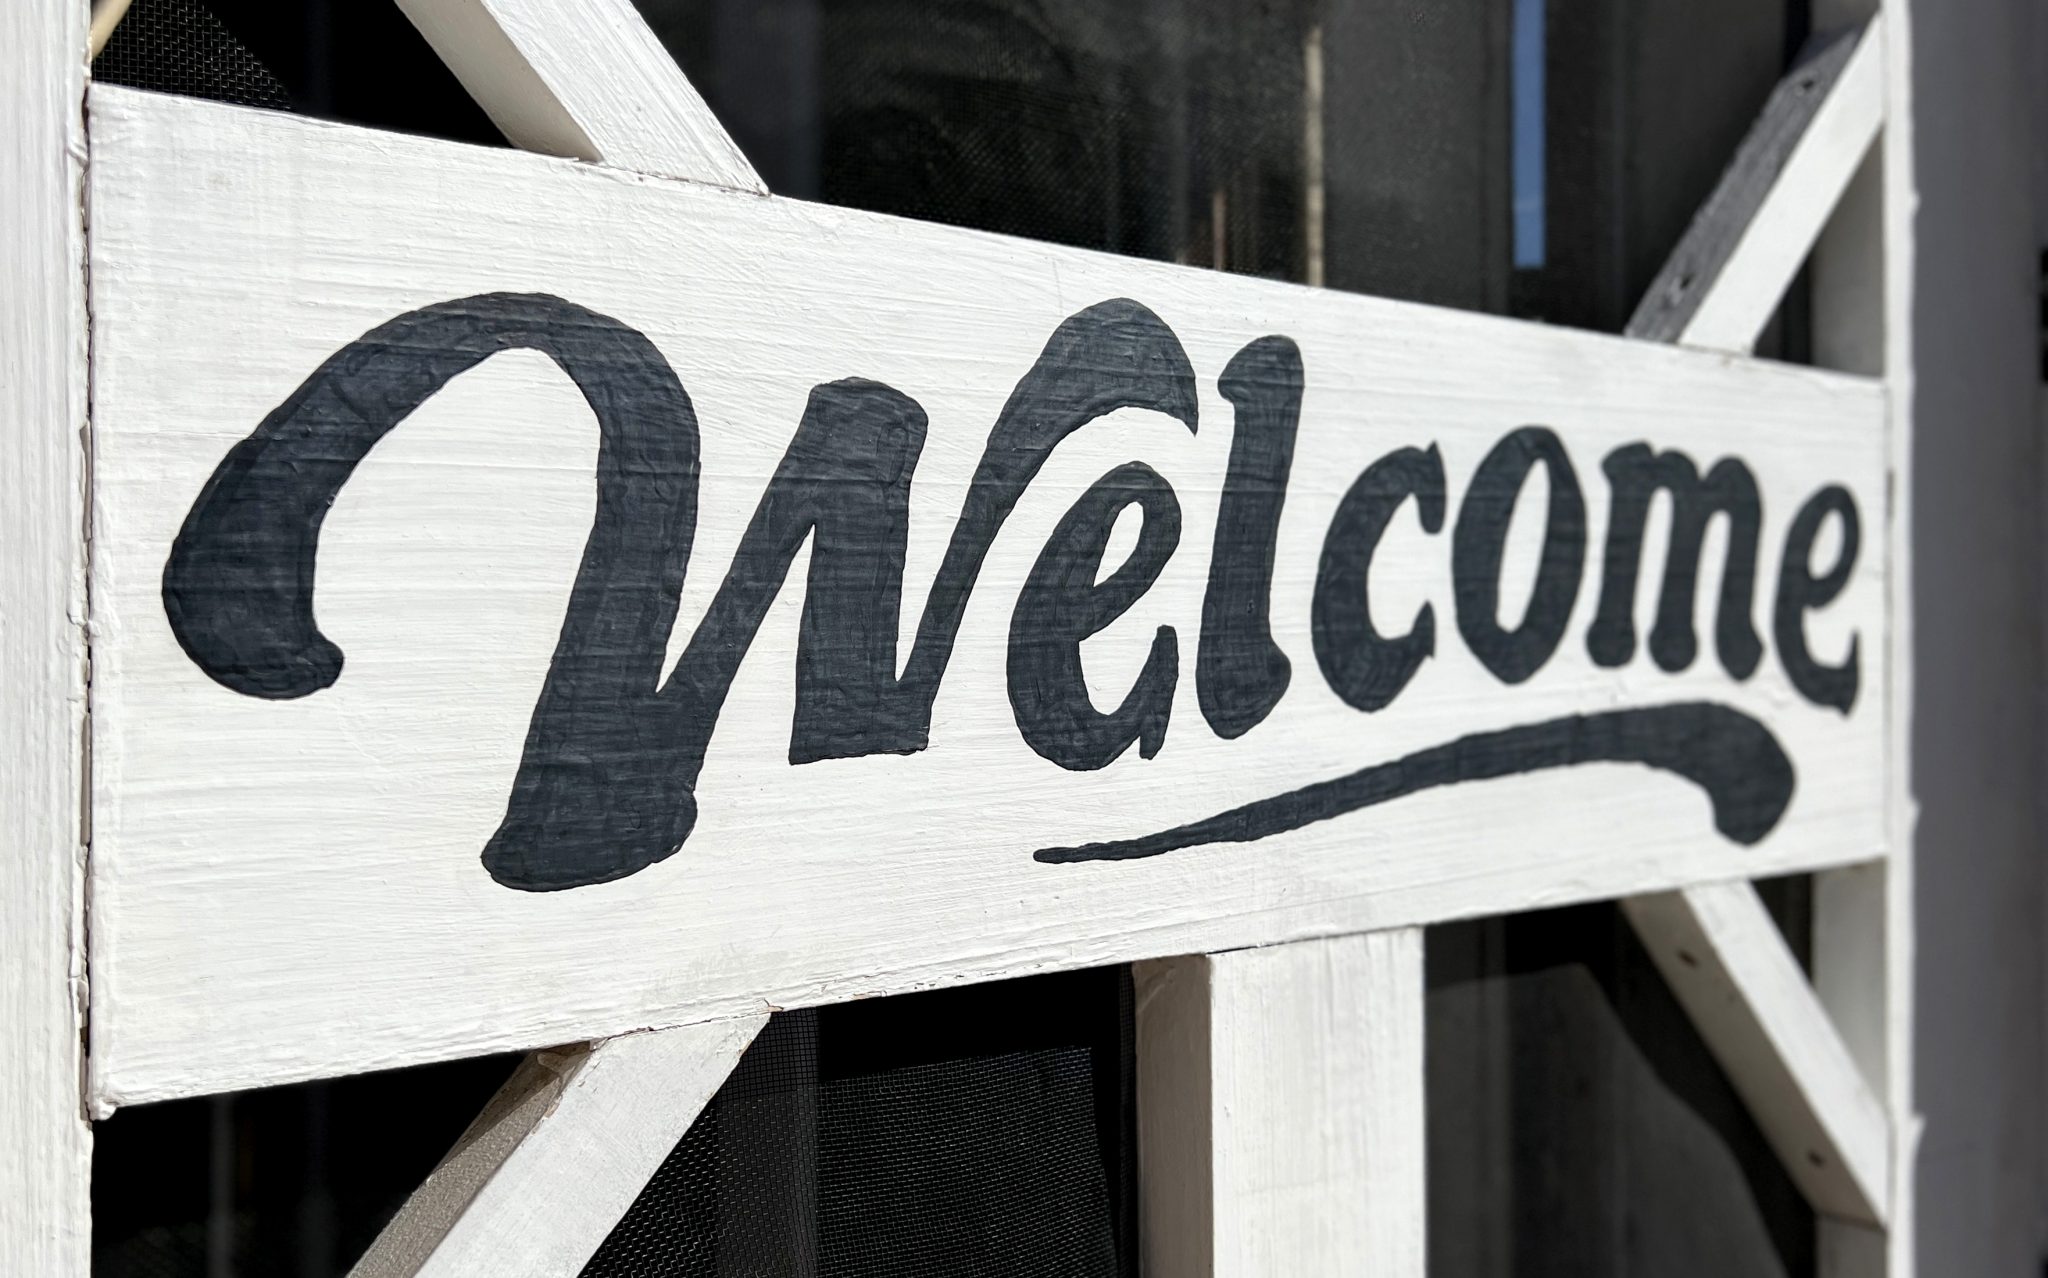 Black and white wooden sign reading "Welcome". Photo contributed by Jennifer Bourn to the WordPress Photo Directory.